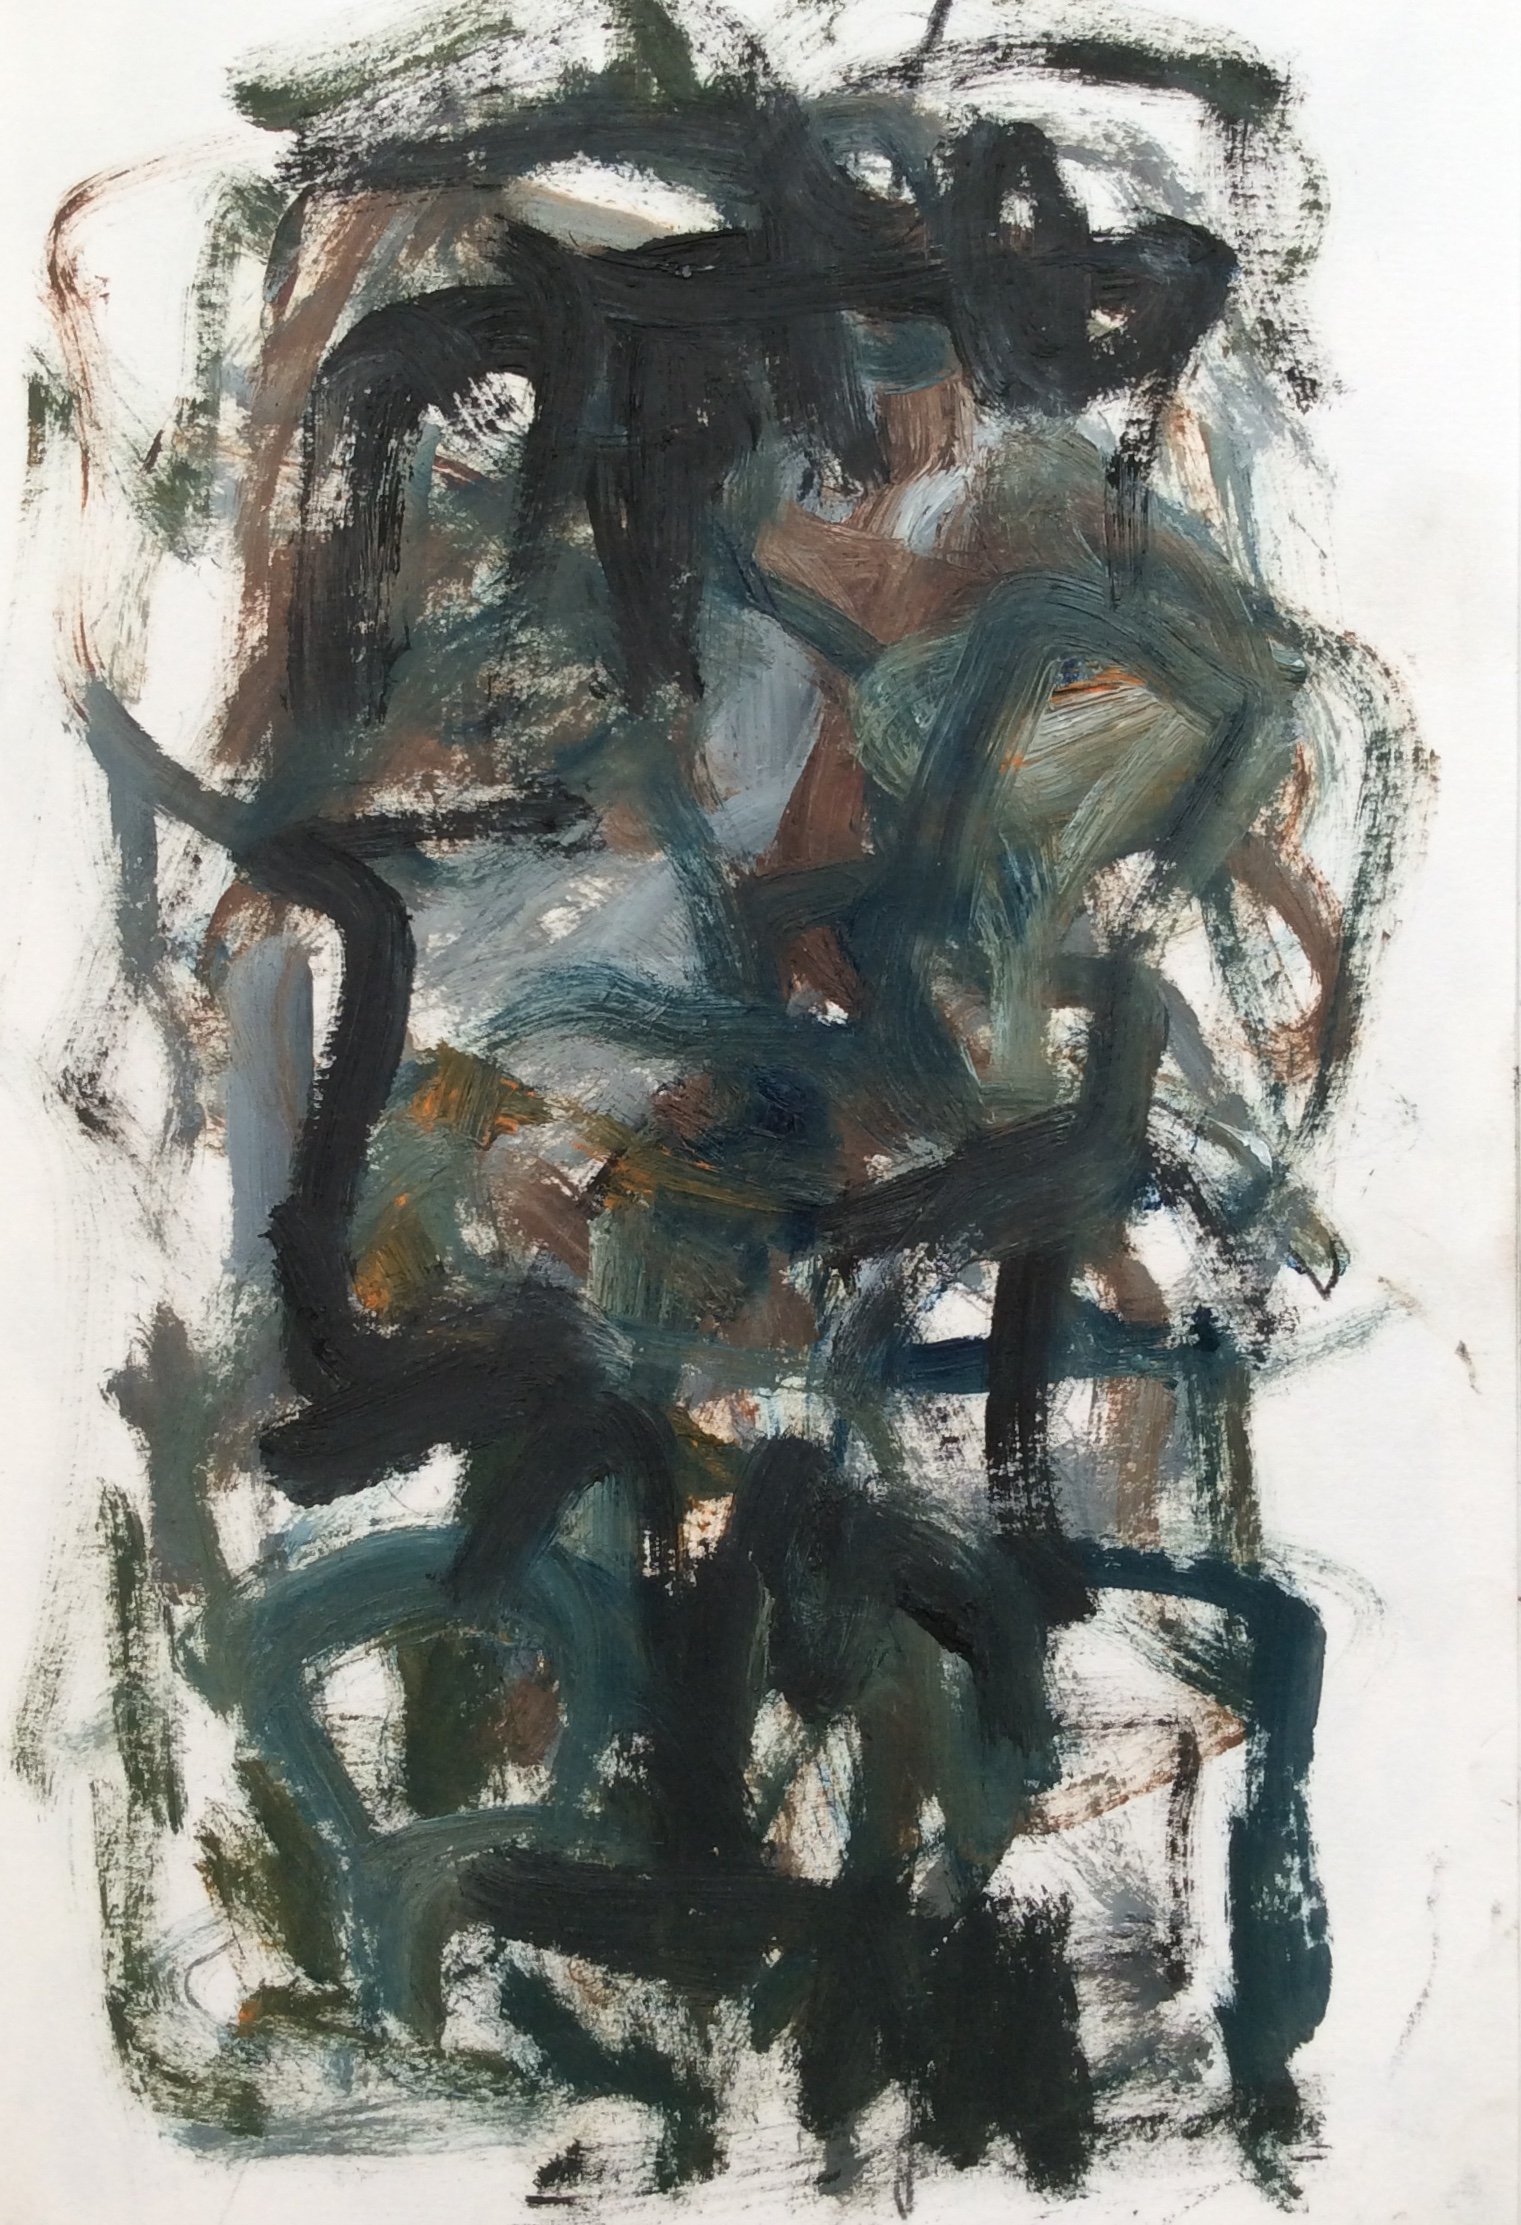 Sketchbook 2, 30x21cm, oil, acrylic and charcoal on paper, 2020.jpg